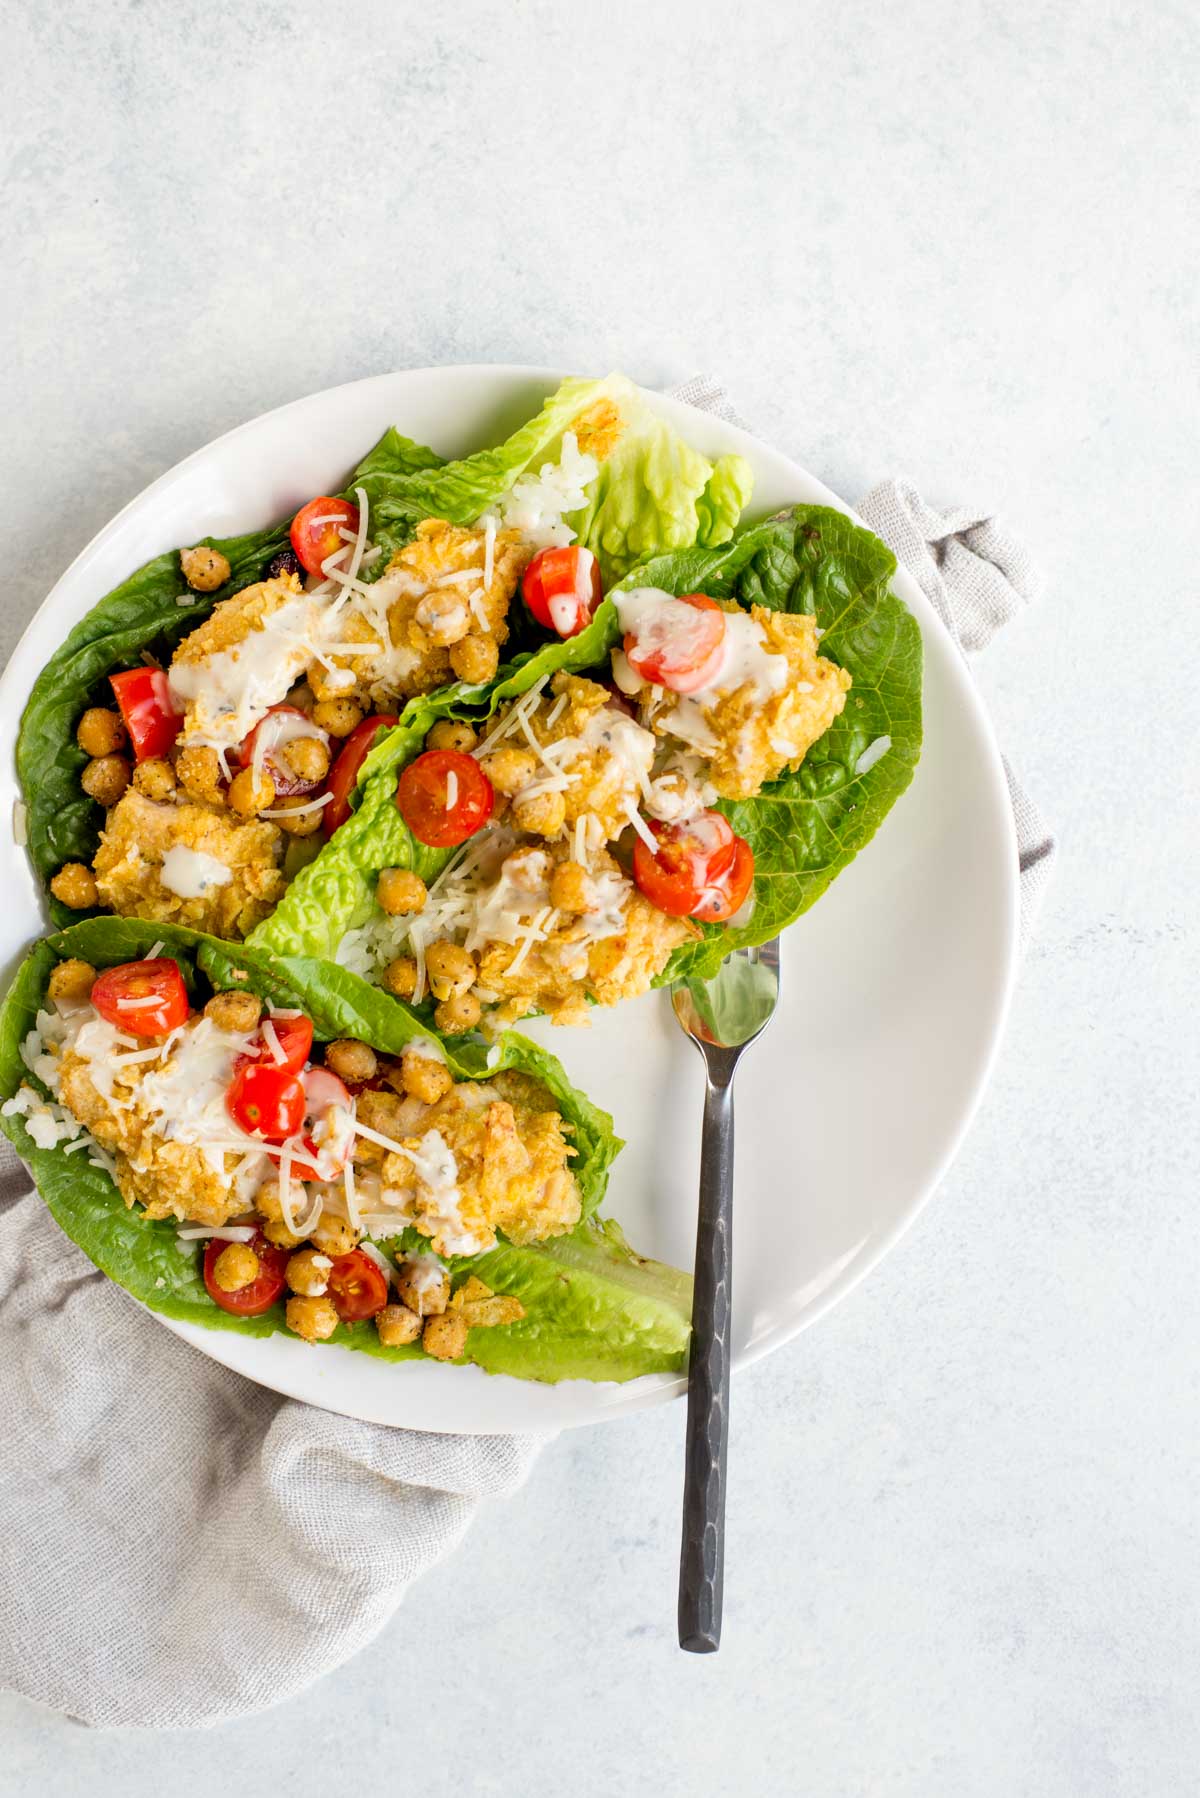 This quick mean is delicious, gluten-free and full of flavor. Healthy breaded chicken in a crispy lettuce wrap.